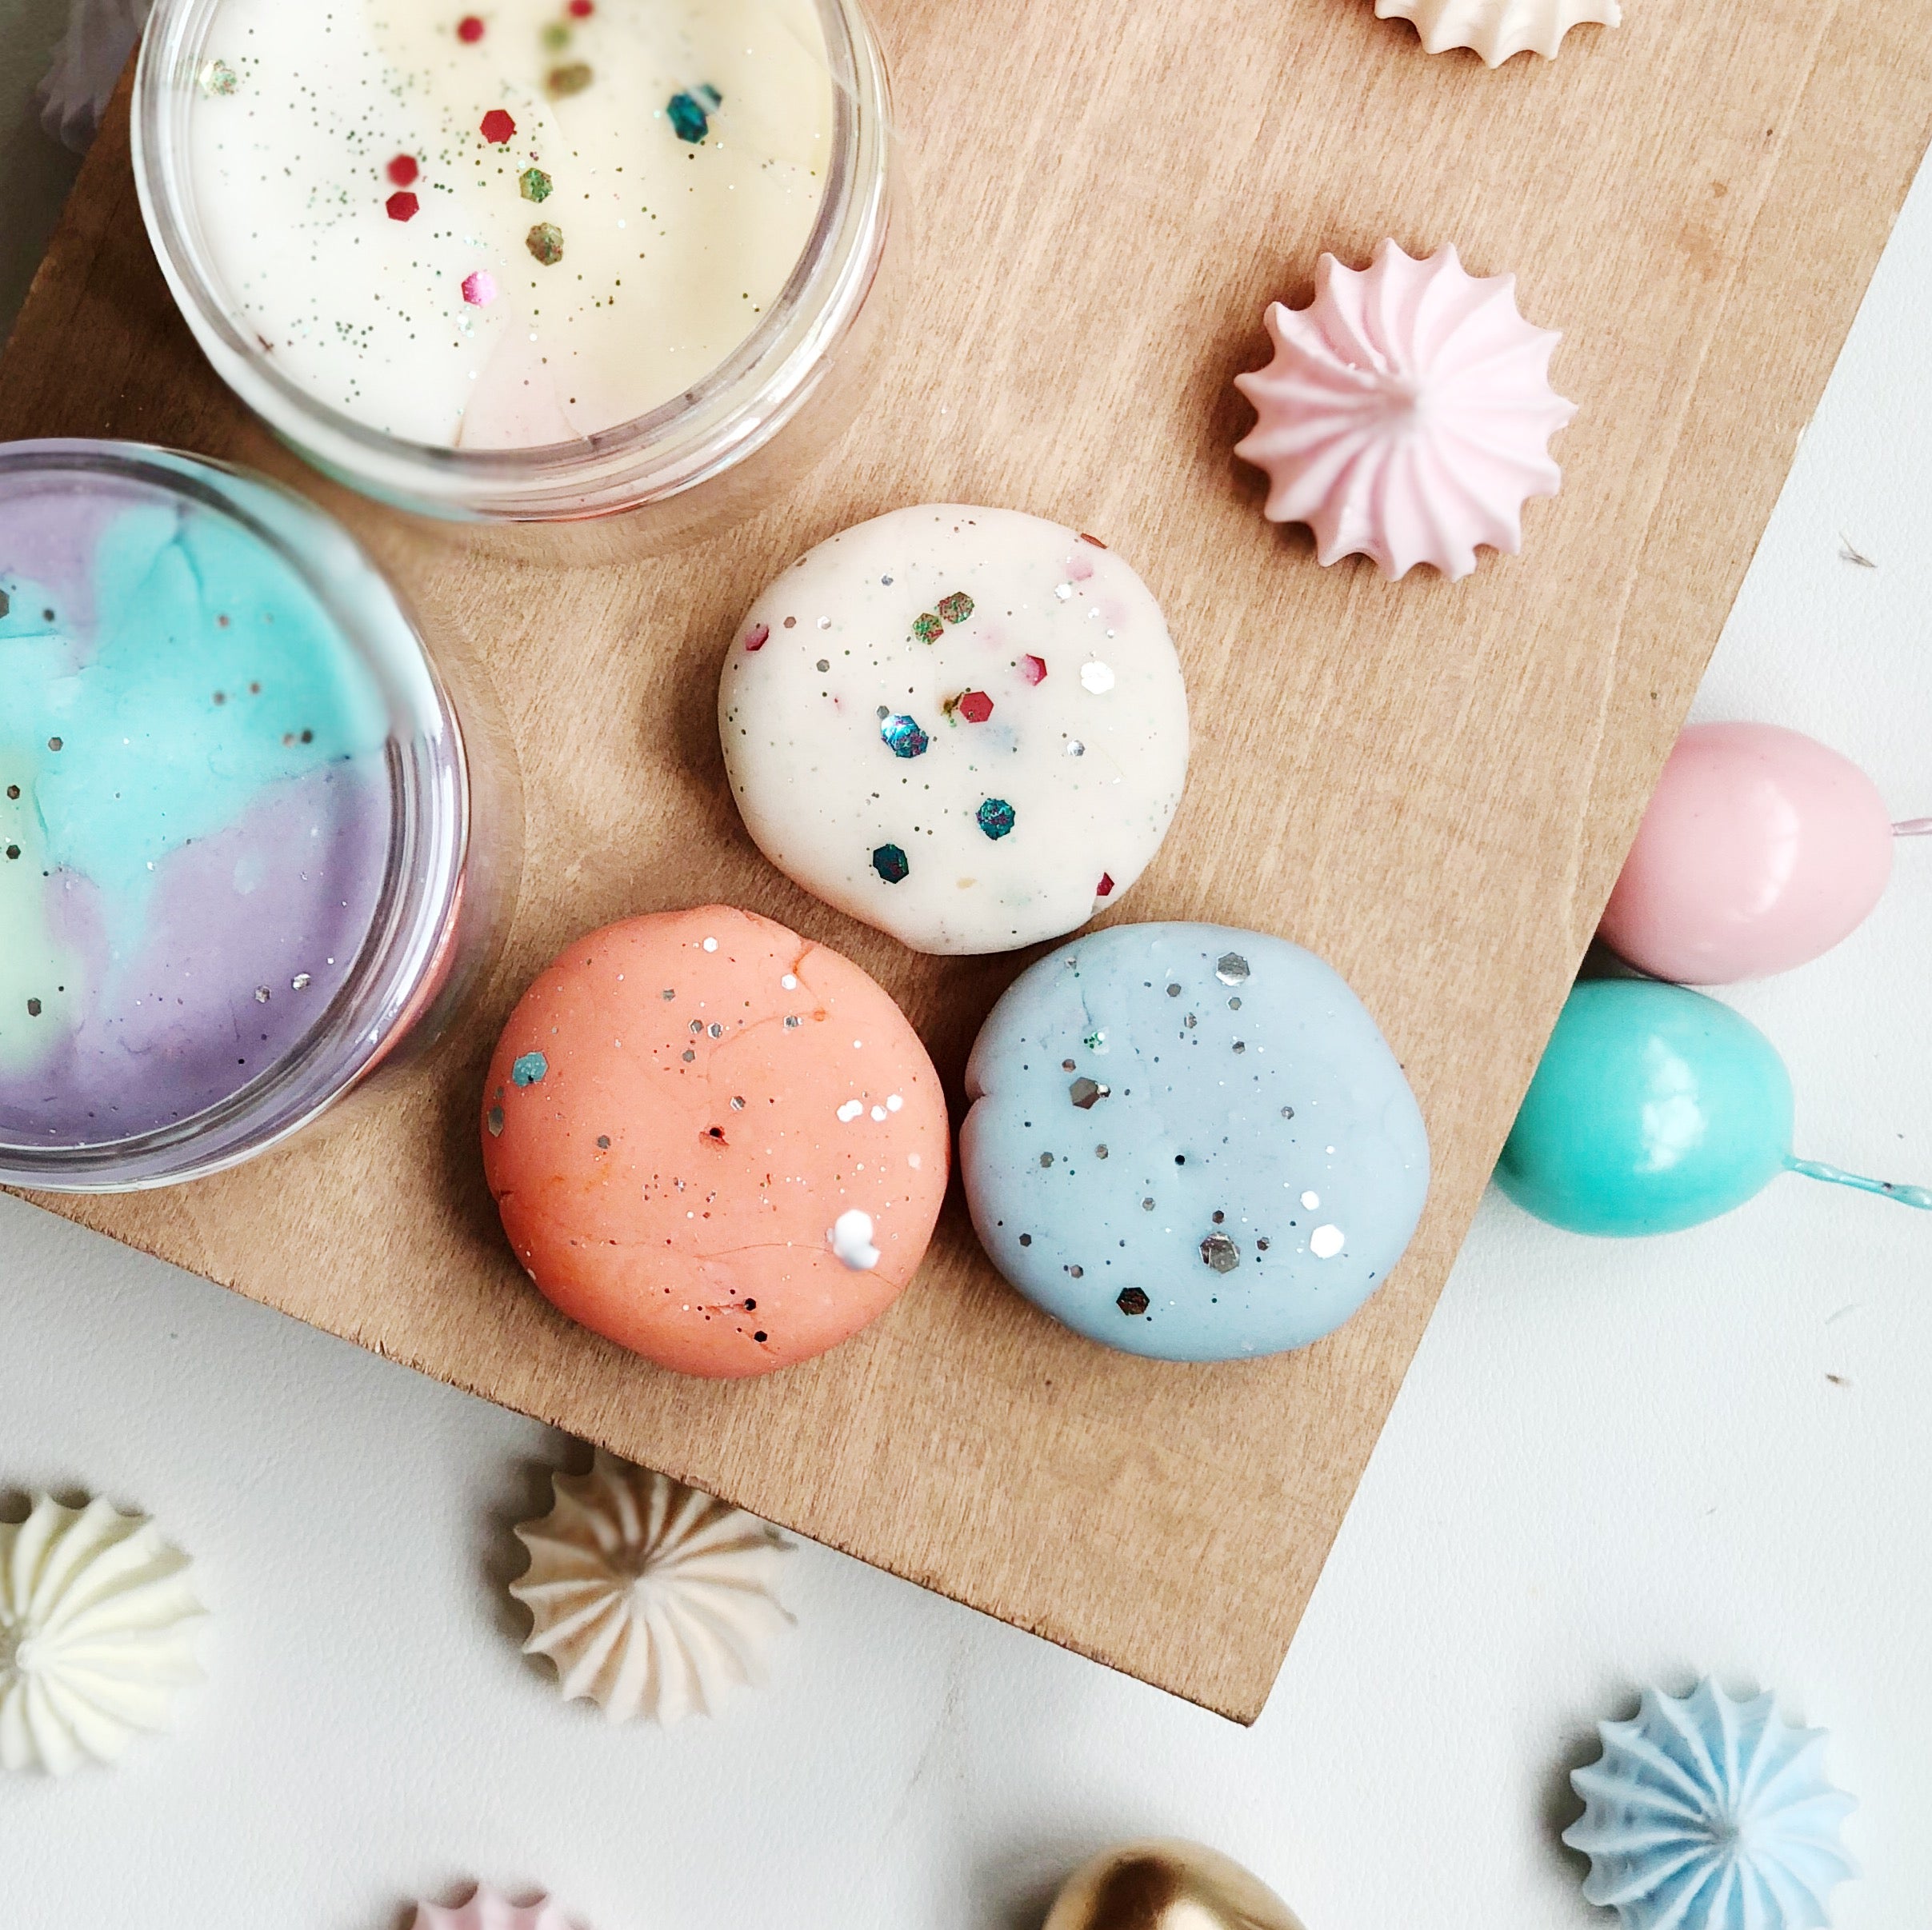 Limited Edition - Birthday Surprise Glitter Play Dough Set